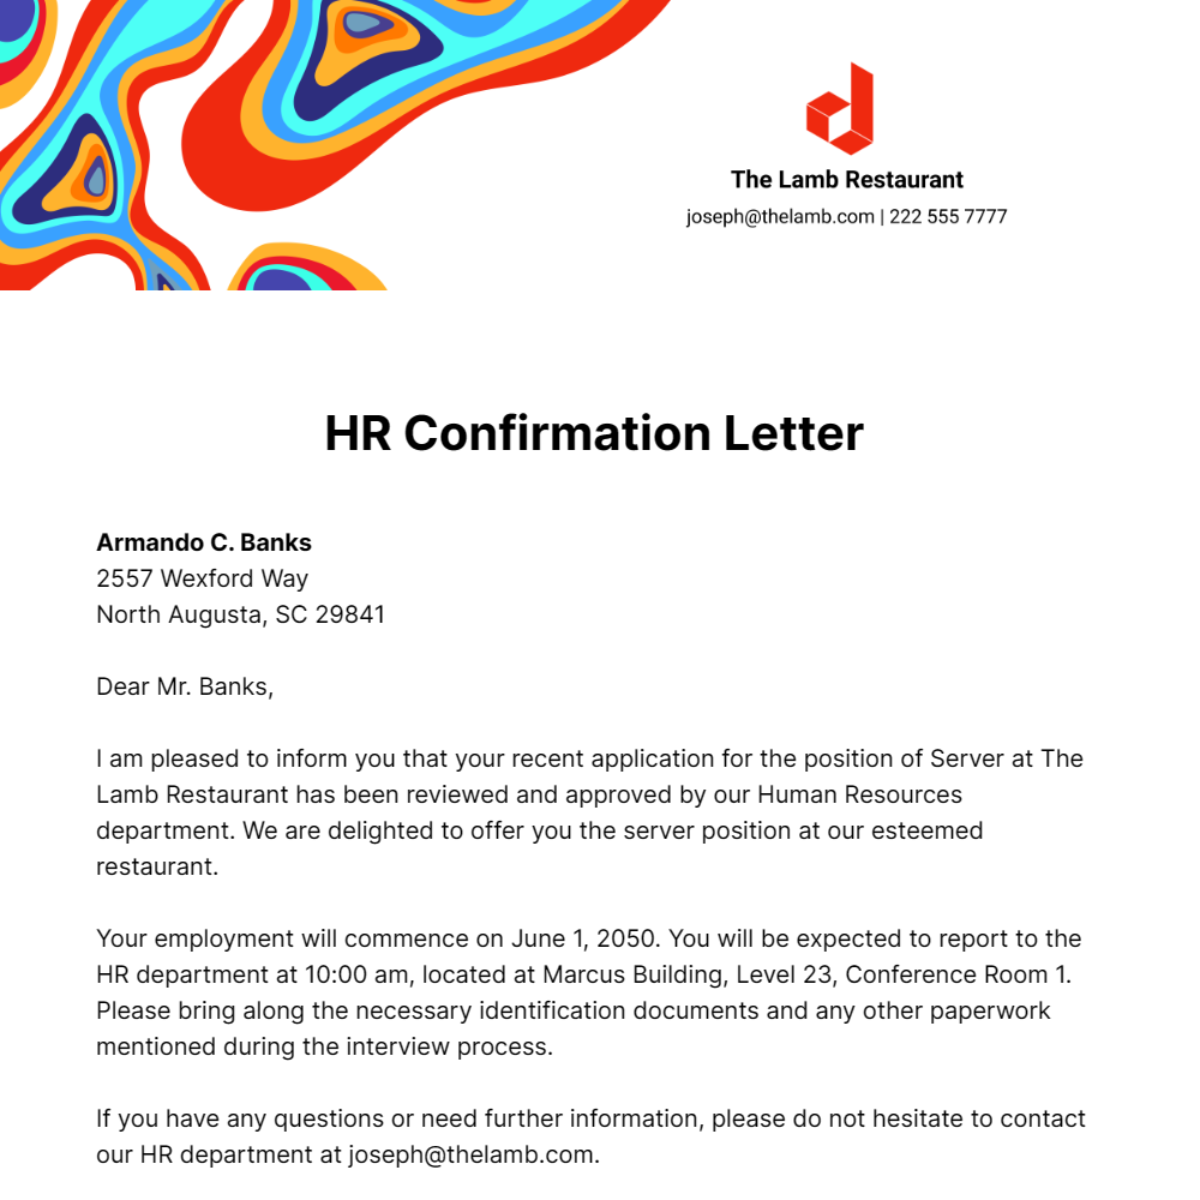 HR Confirmation Letter Template